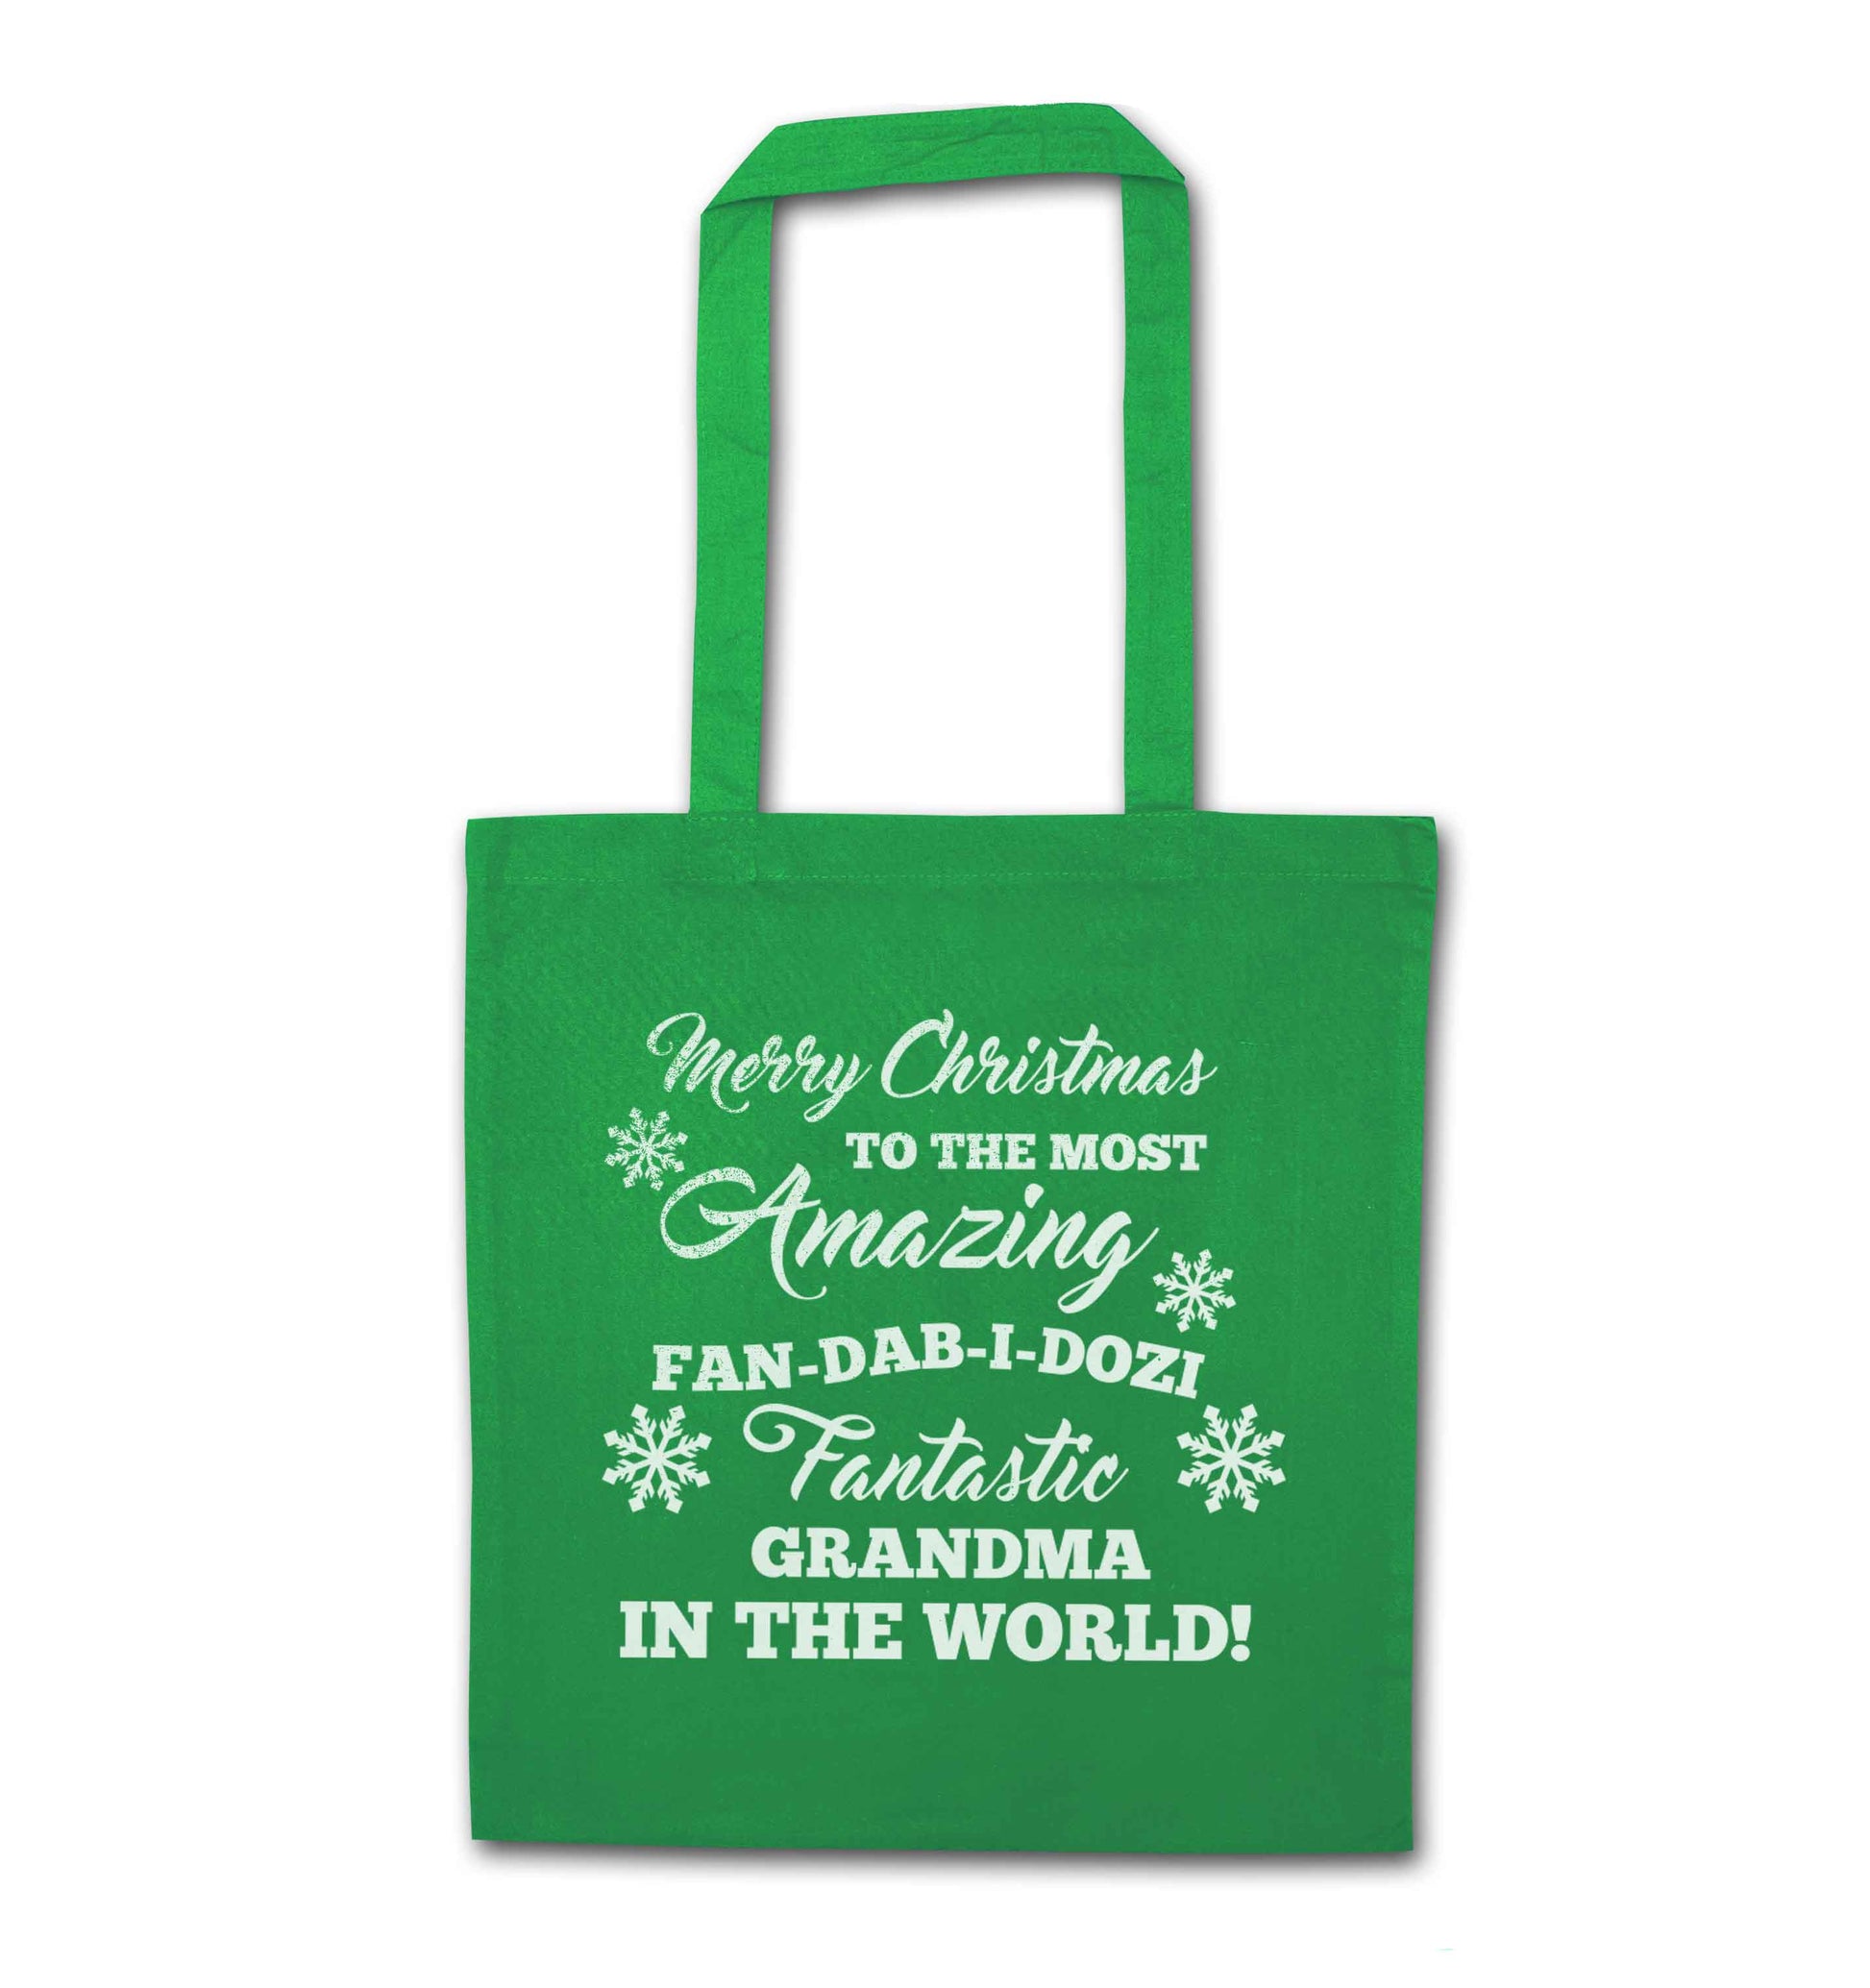 Merry Christmas to the most amazing fan-dab-i-dozi fantasic Grandma in the world green tote bag